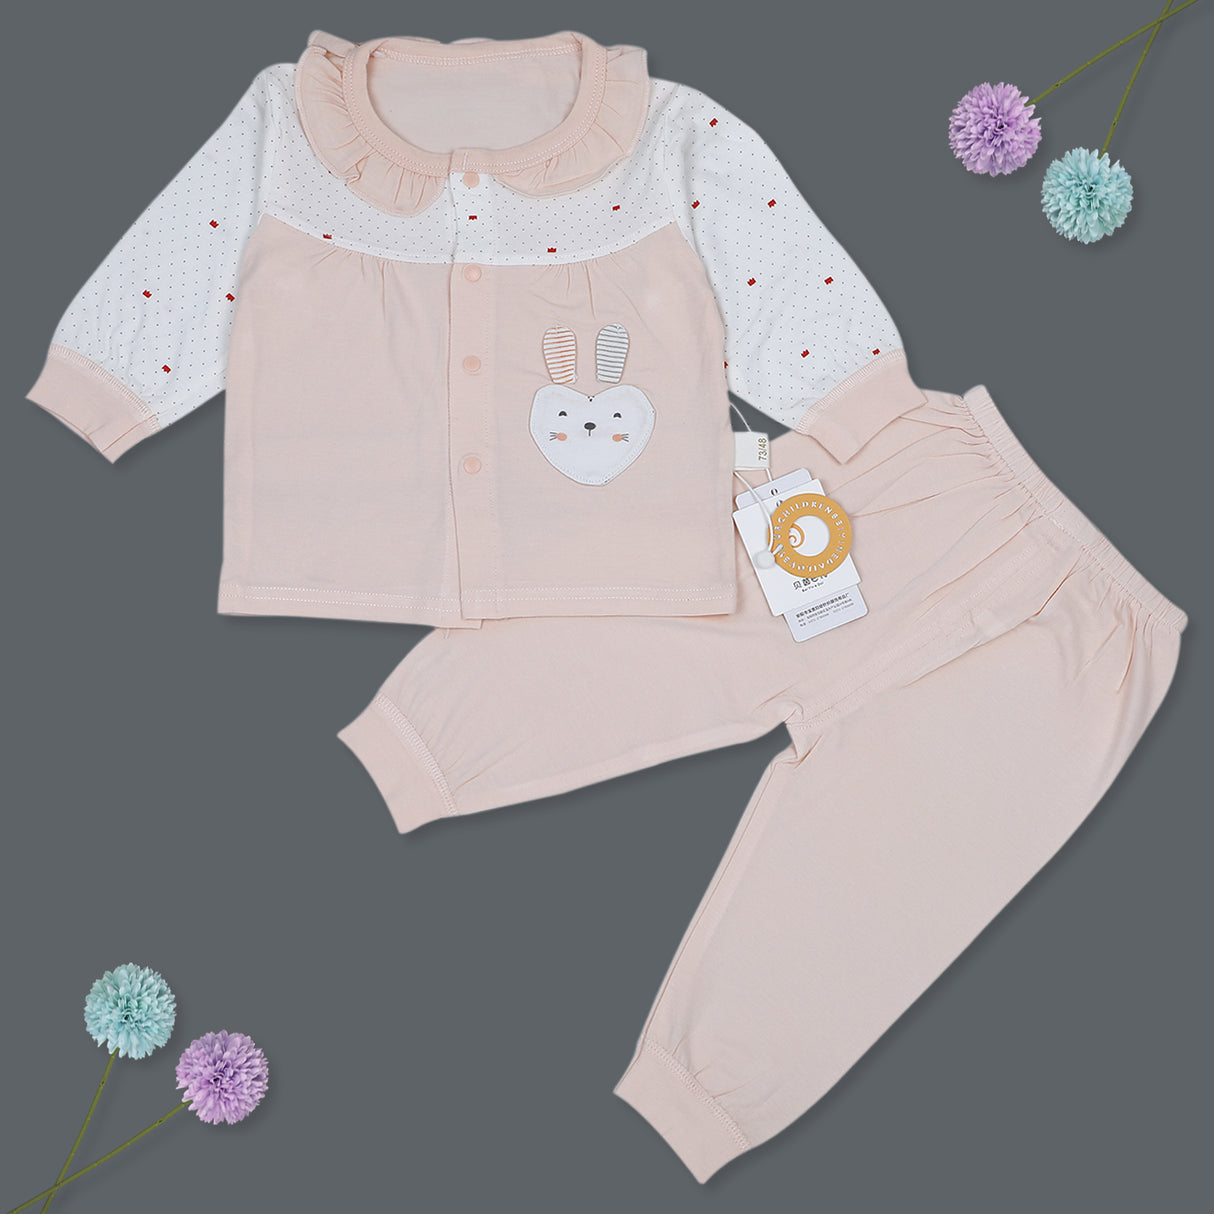 Bunny Full Sleeves Top And Pyjama Buttoned Night Suit